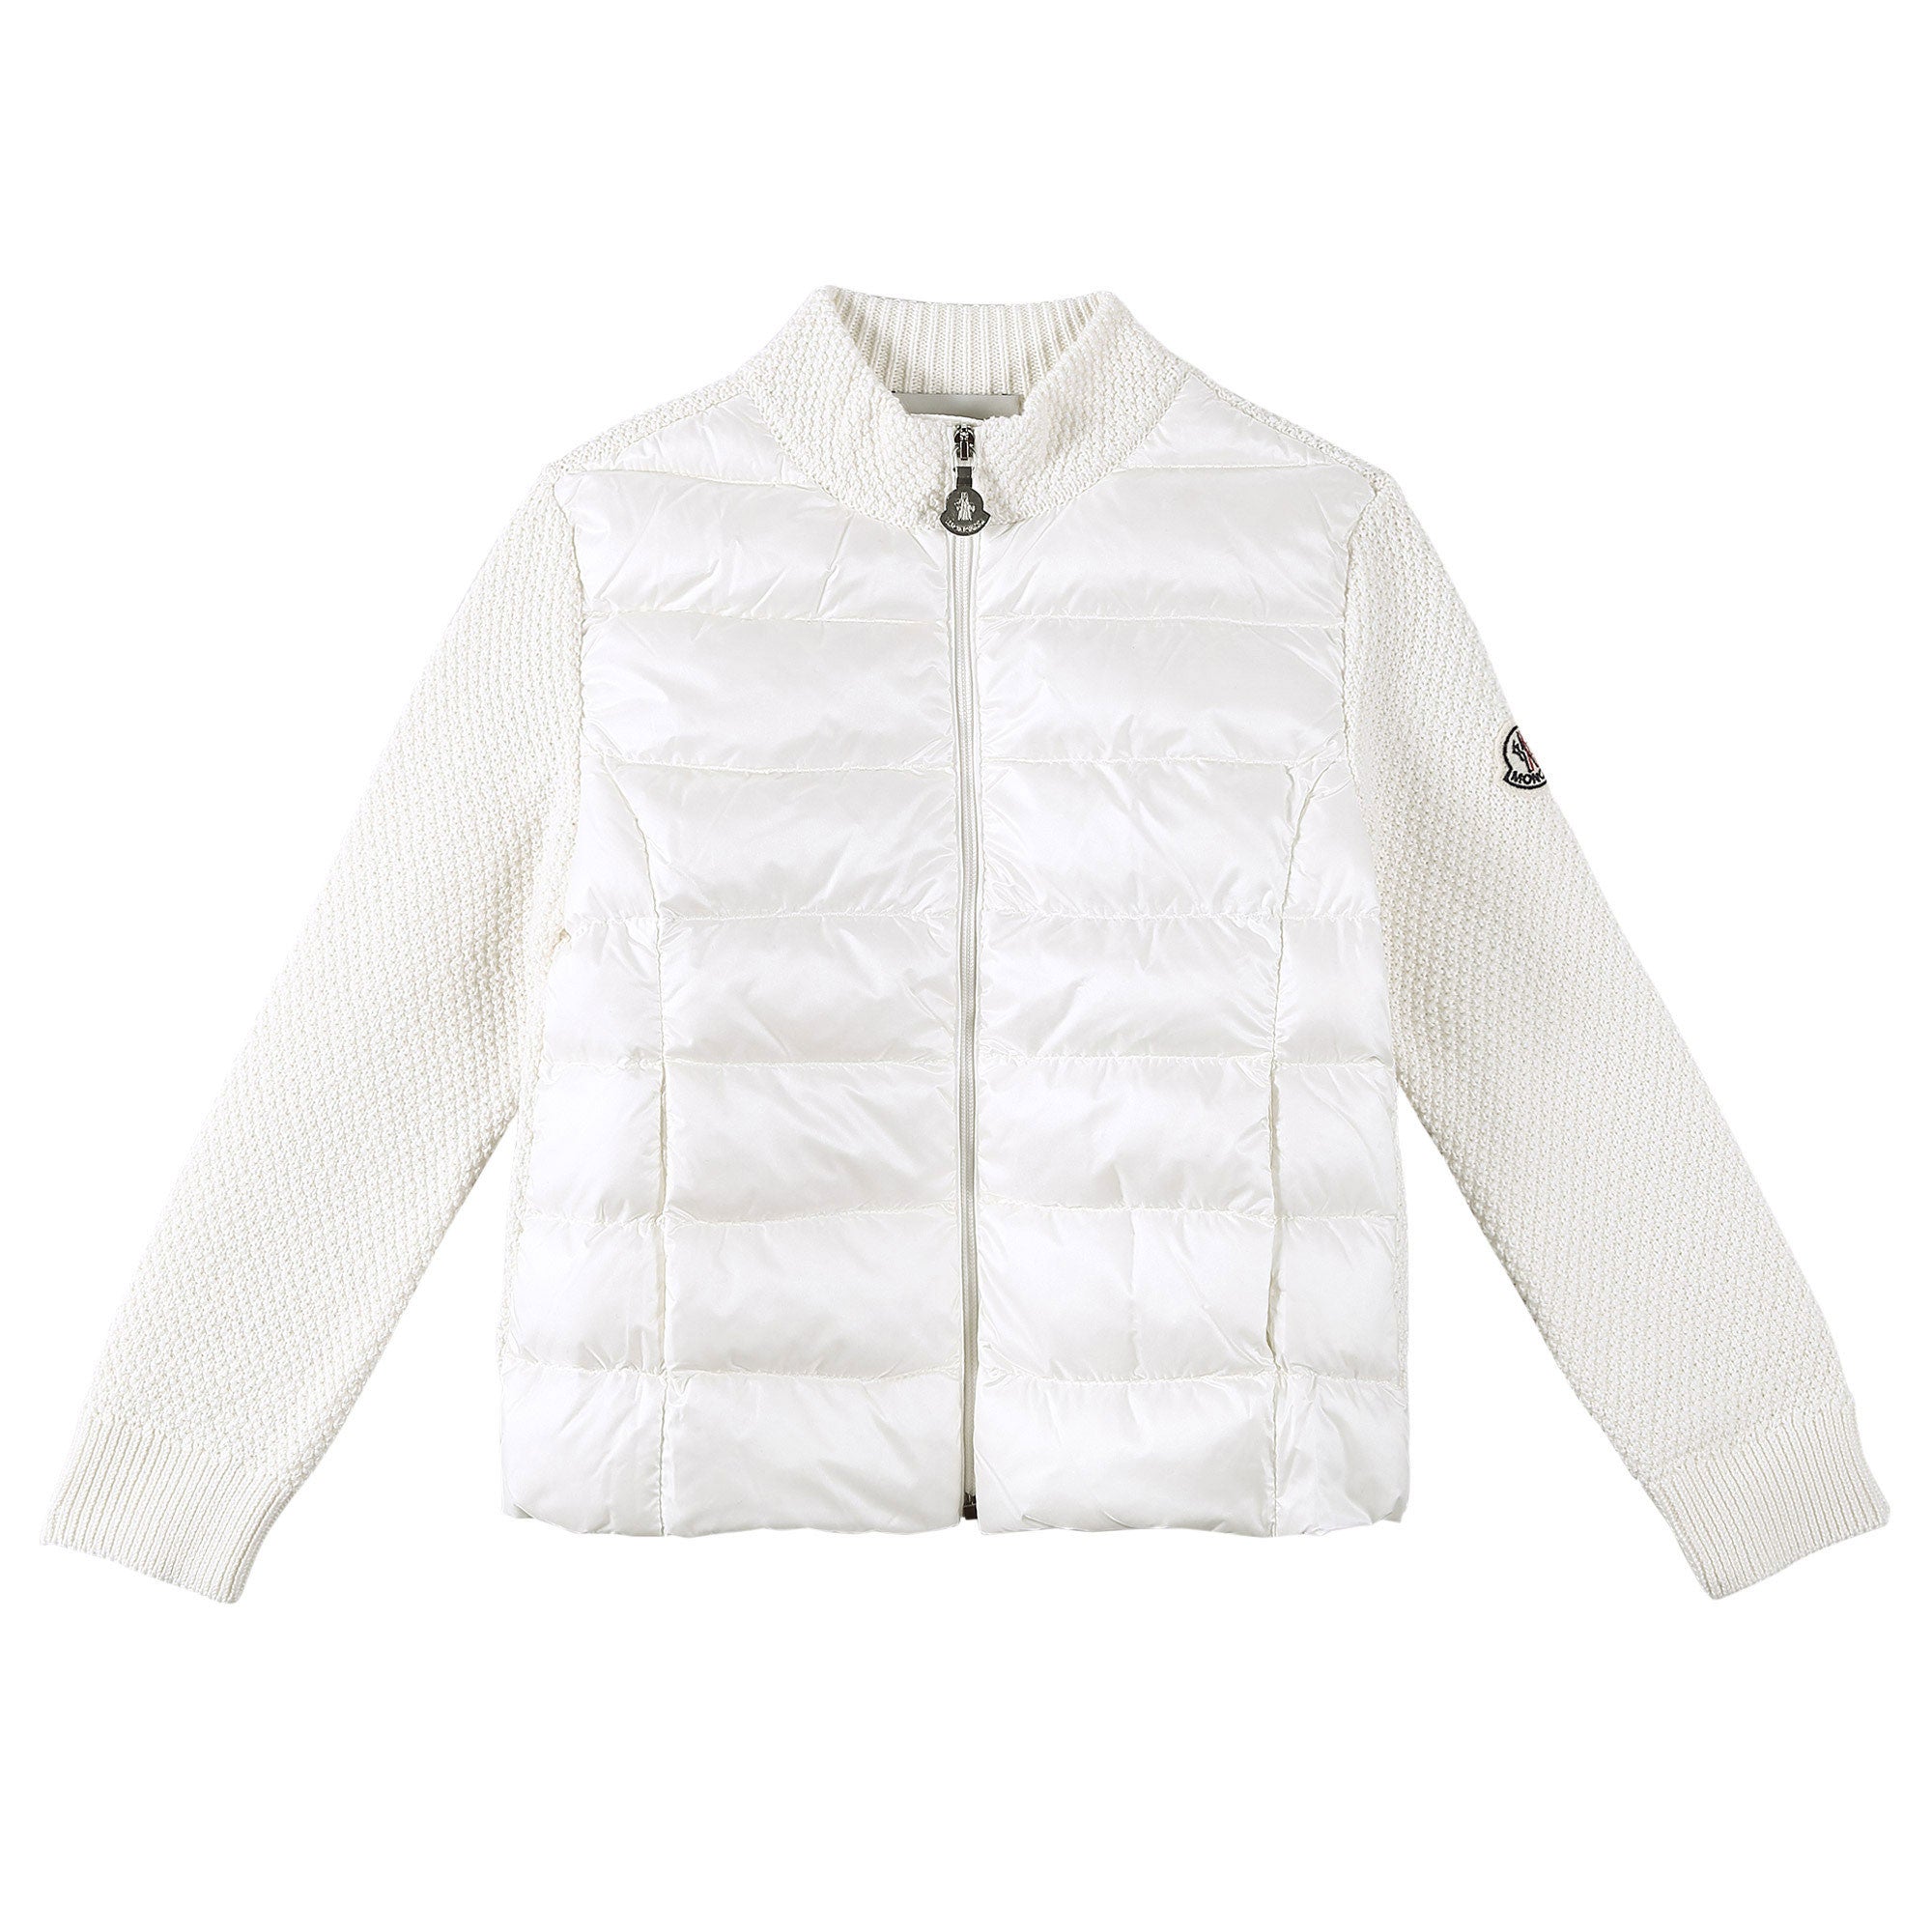 Boys White Down Padded Knitted Jackets - CÉMAROSE | Children's Fashion Store - 1